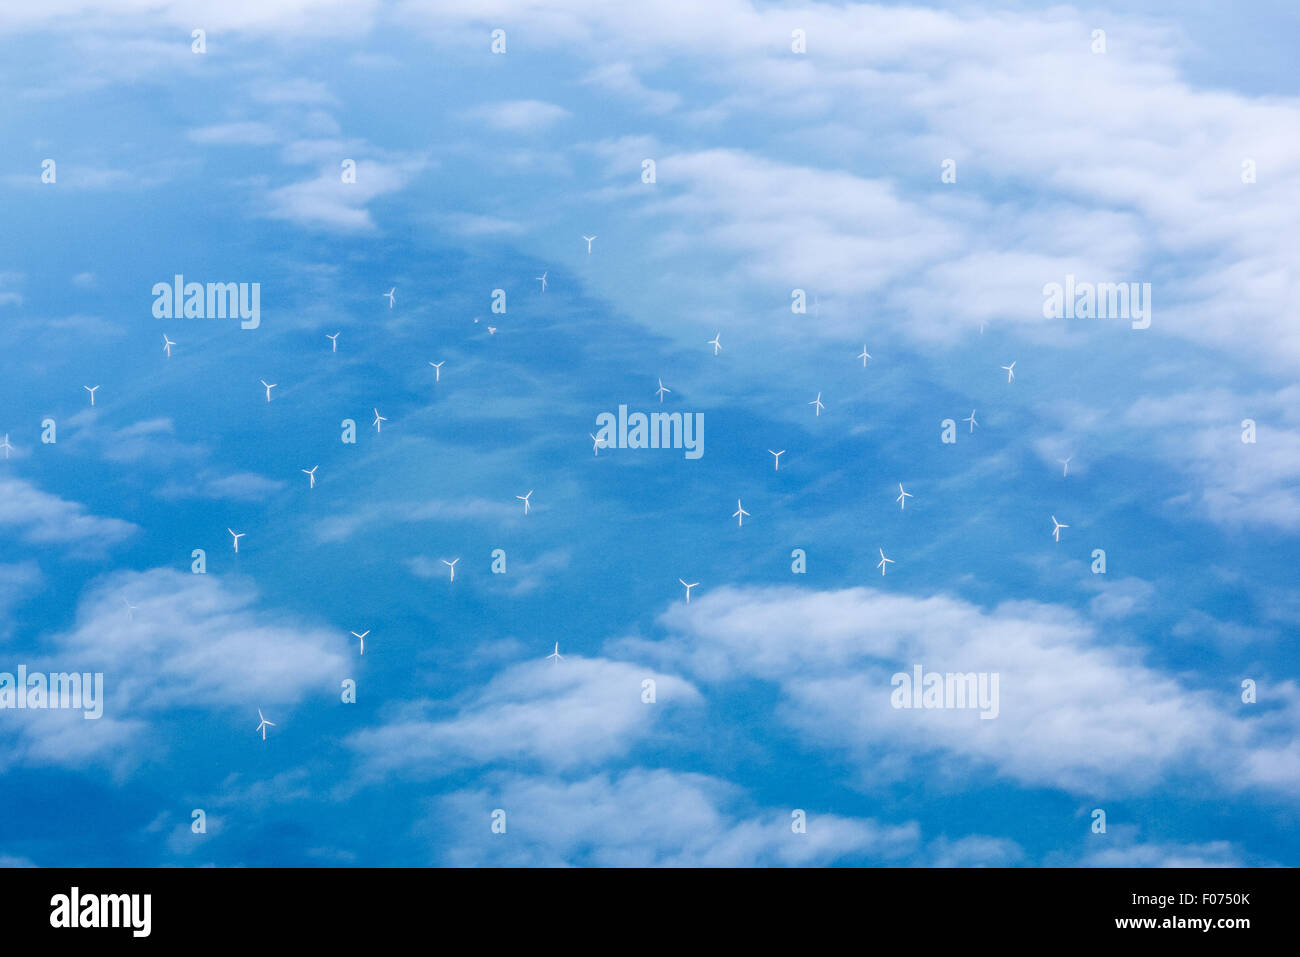 The Channel, England. Aerial view of wind turbines in the sea seen through clouds. Stock Photo